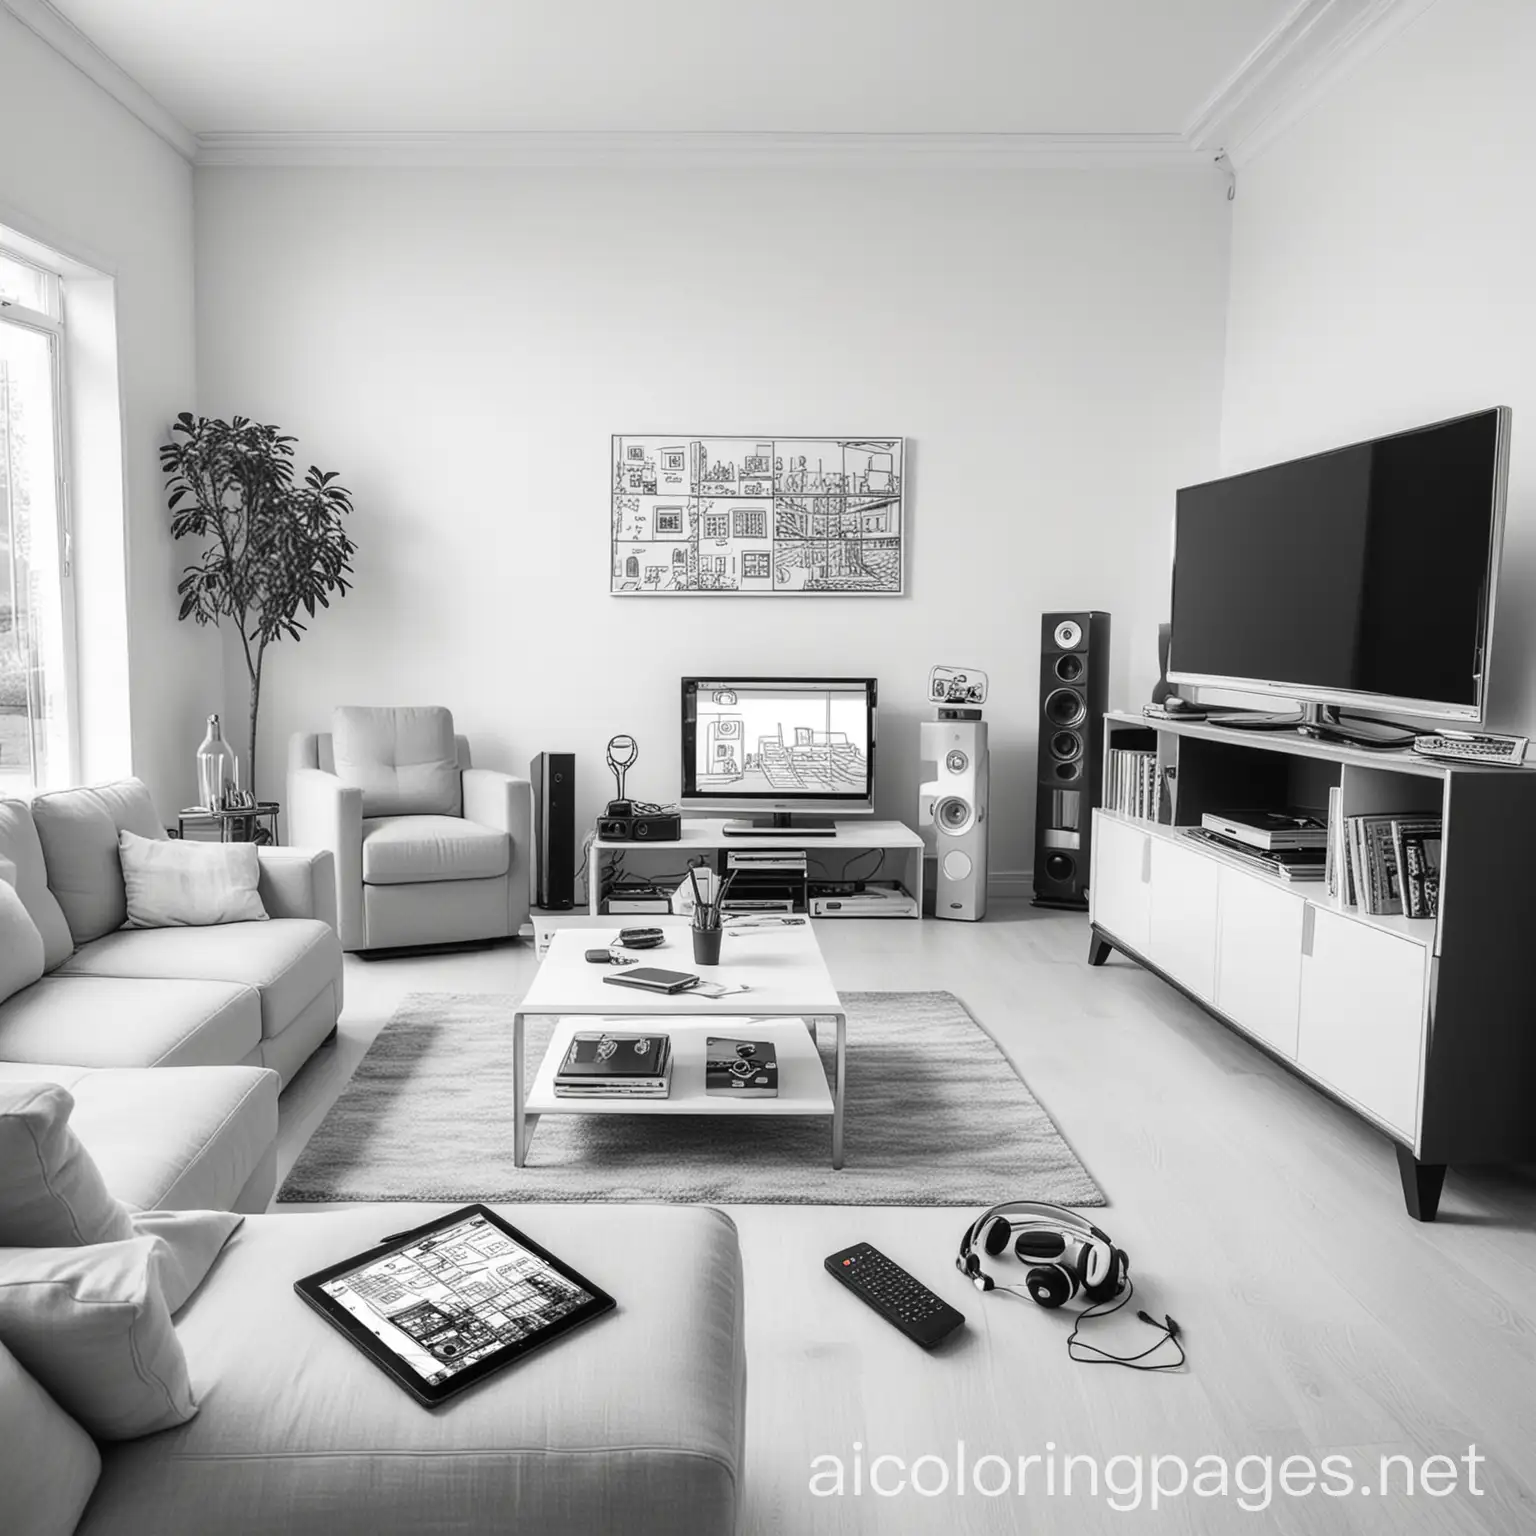 A picture of a living room with a family and these gadgets inside: tv screen, headphones, pendrive, calculator, satnav, tablet, laptop, mp3 player, videogames console, Coloring Page, black and white, line art, white background, Simplicity, Ample White Space. The background of the coloring page is plain white to make it easy for young children to color within the lines. The outlines of all the subjects are easy to distinguish, making it simple for kids to color without too much difficulty